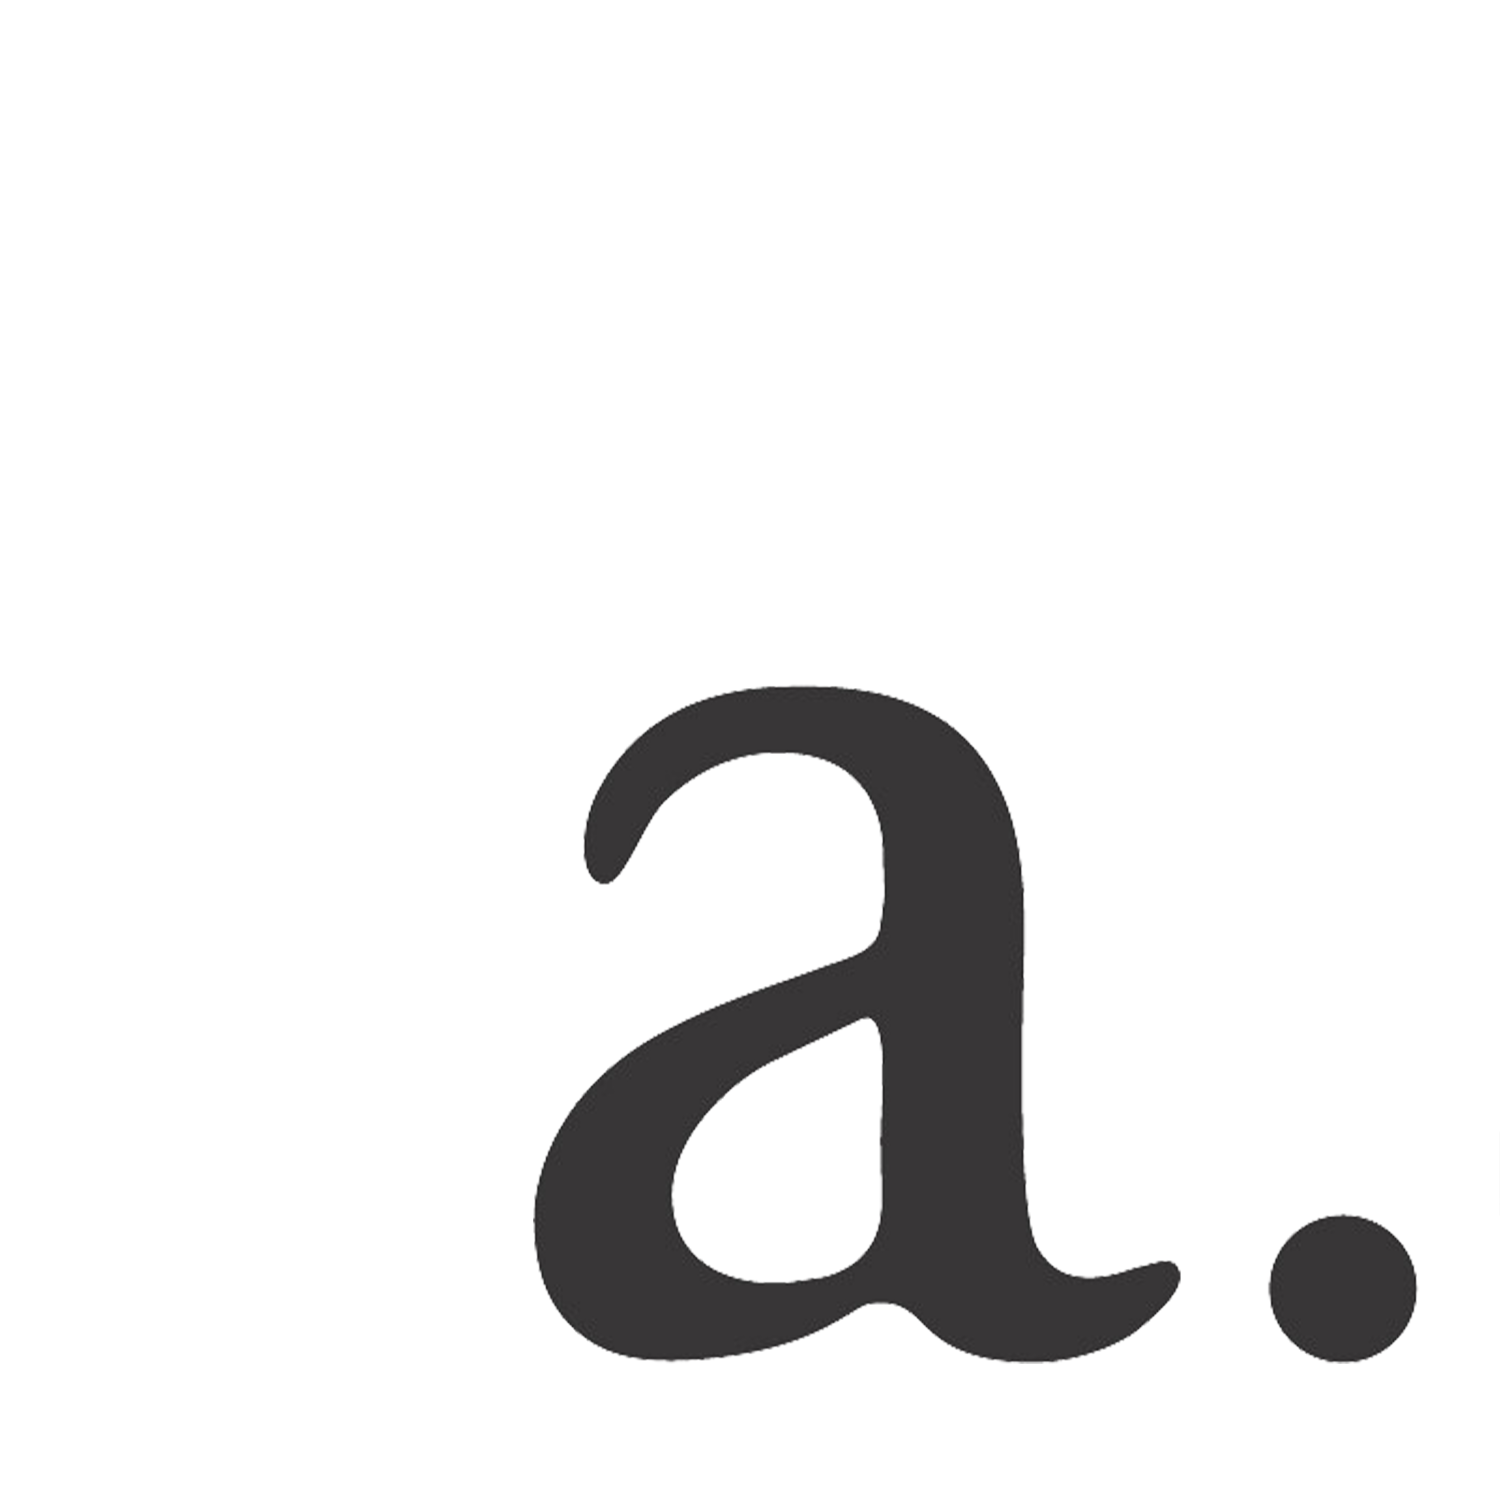 “a” is for Amedeo, the founder of A.Testoni.